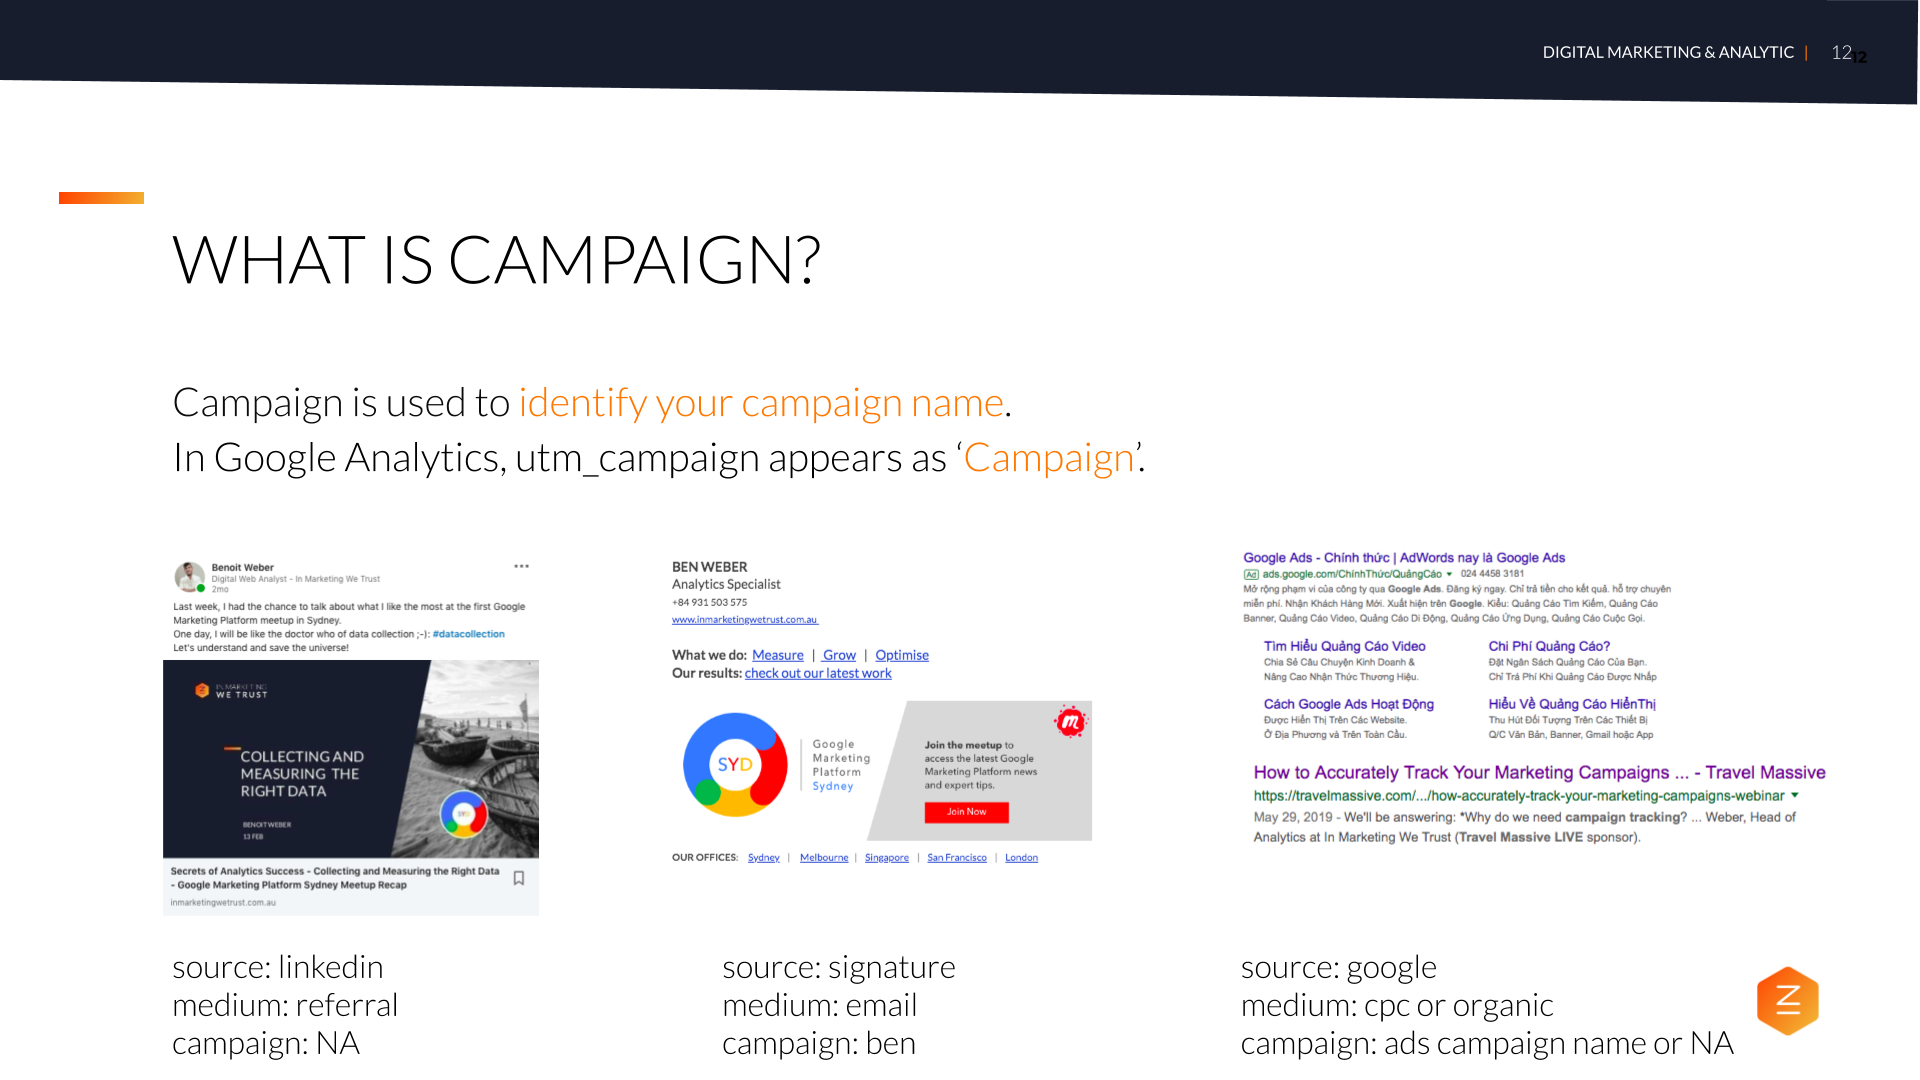 What is campaign - How to Accurately Track Marketing Campaigns